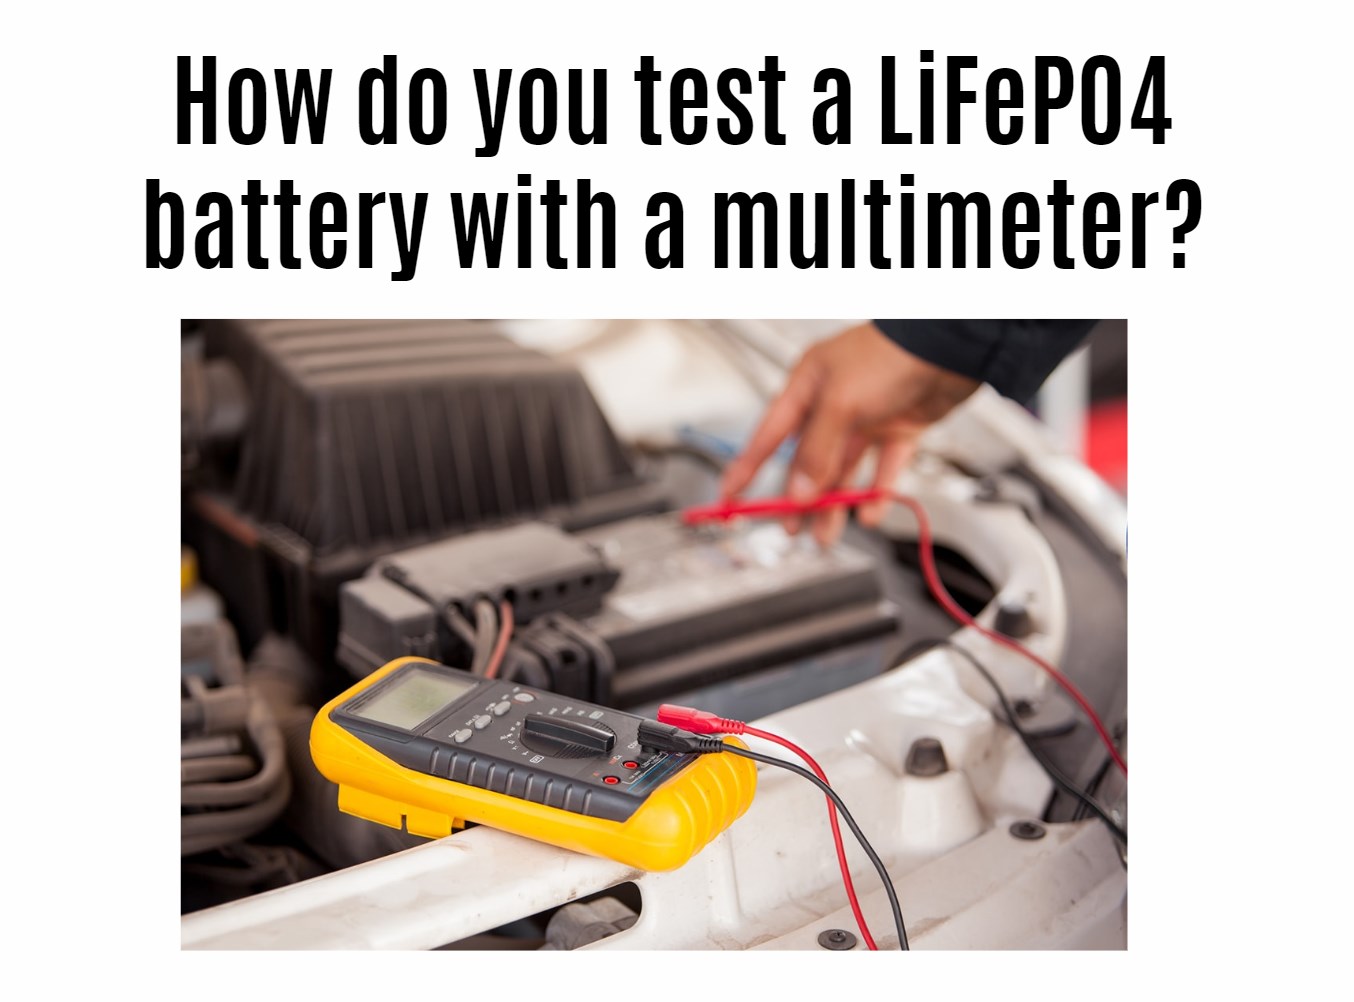 How do you test a LiFePO4 battery with a multimeter?